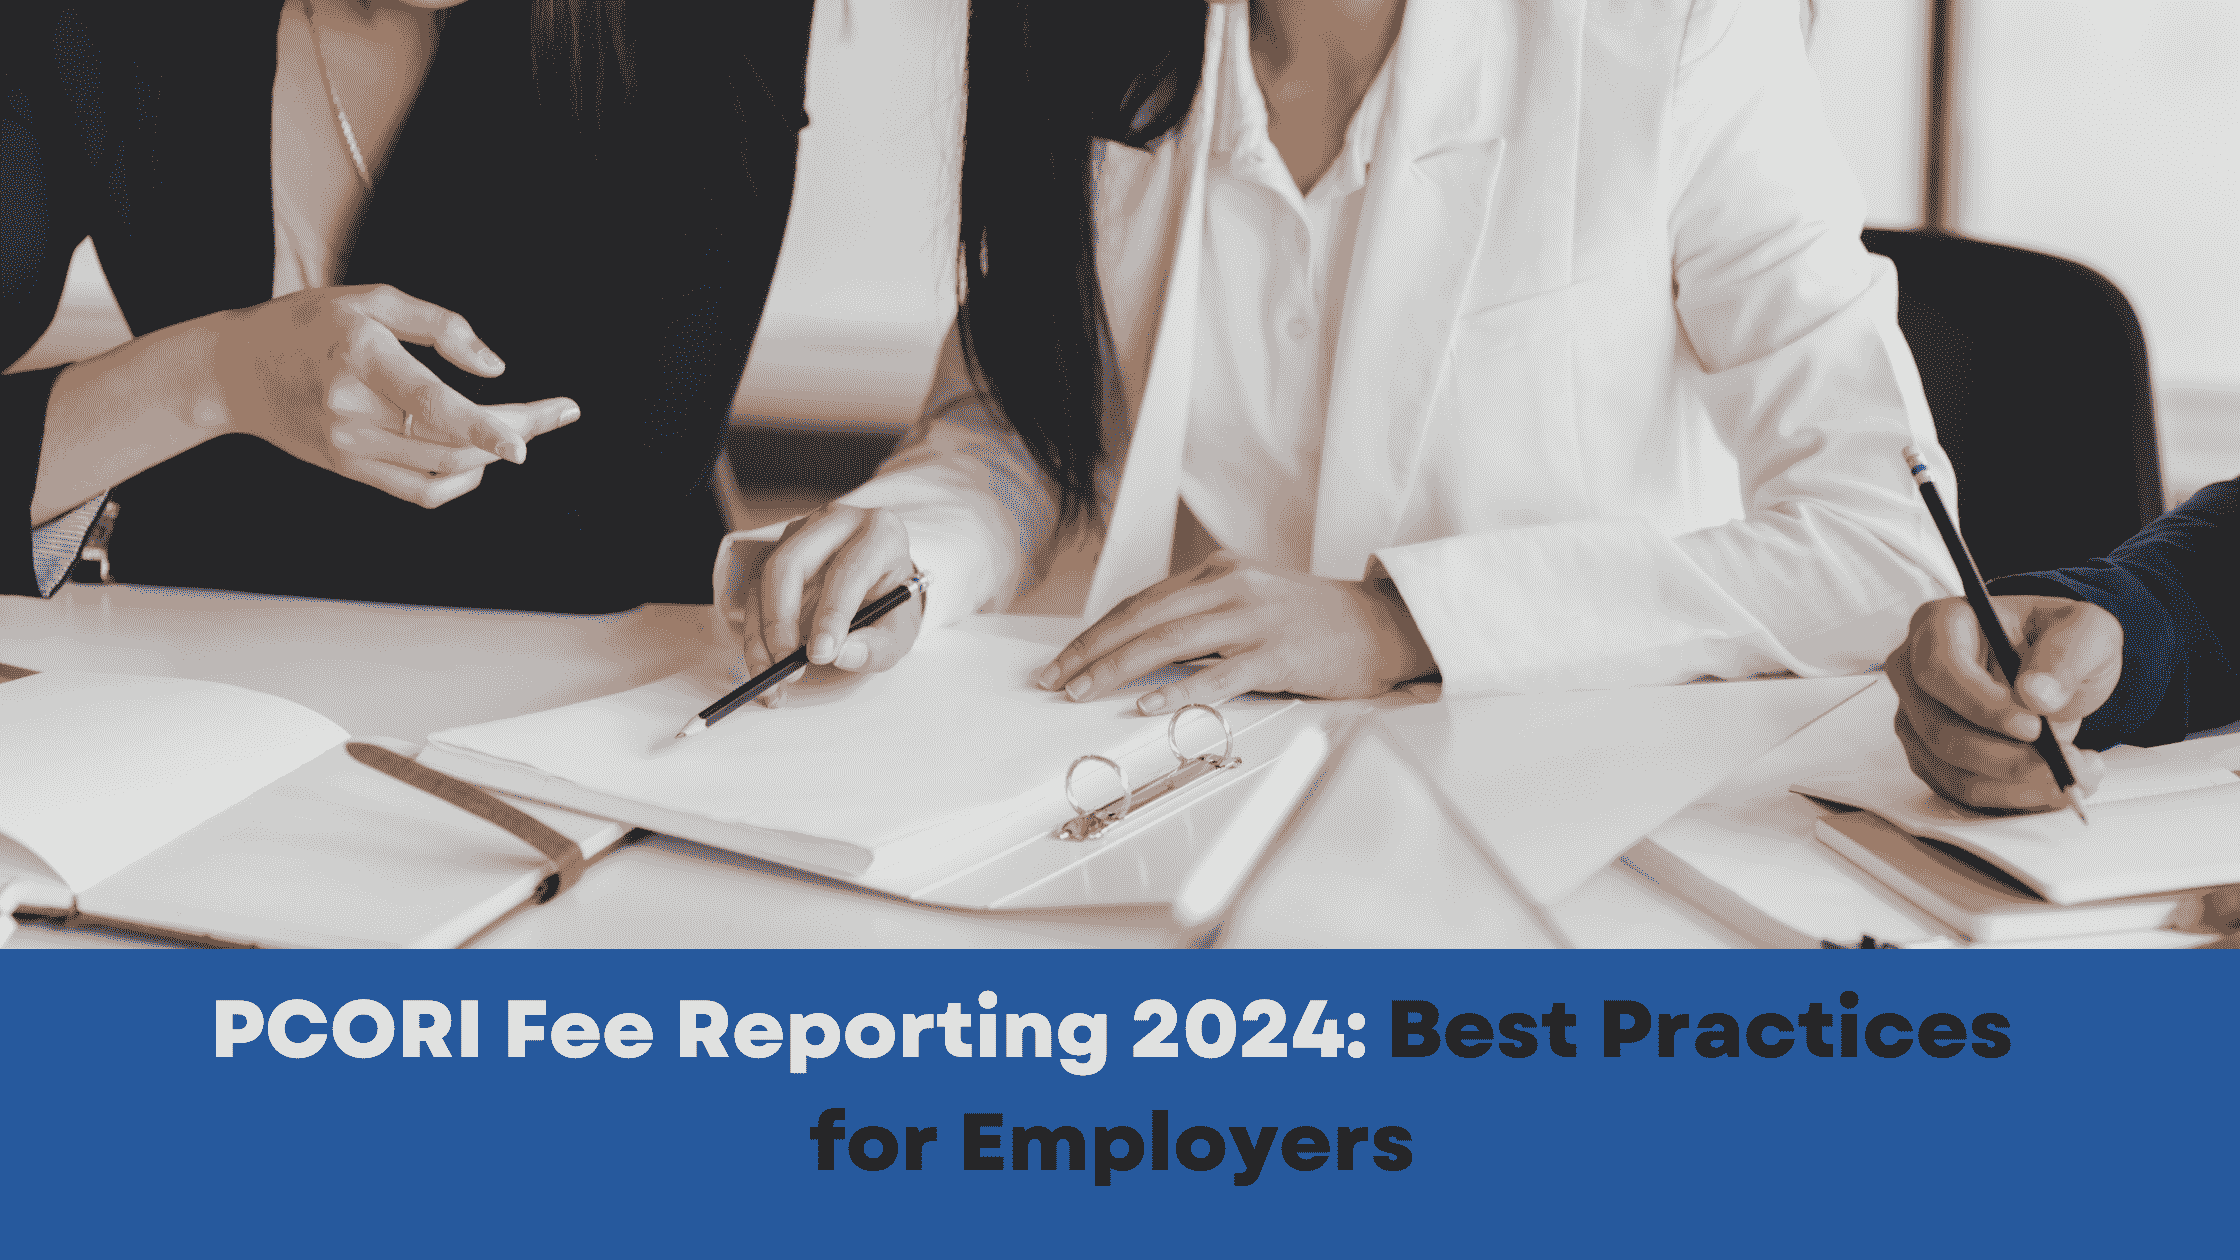 PCORI Fee Reporting 2024: Best Practices for Employers